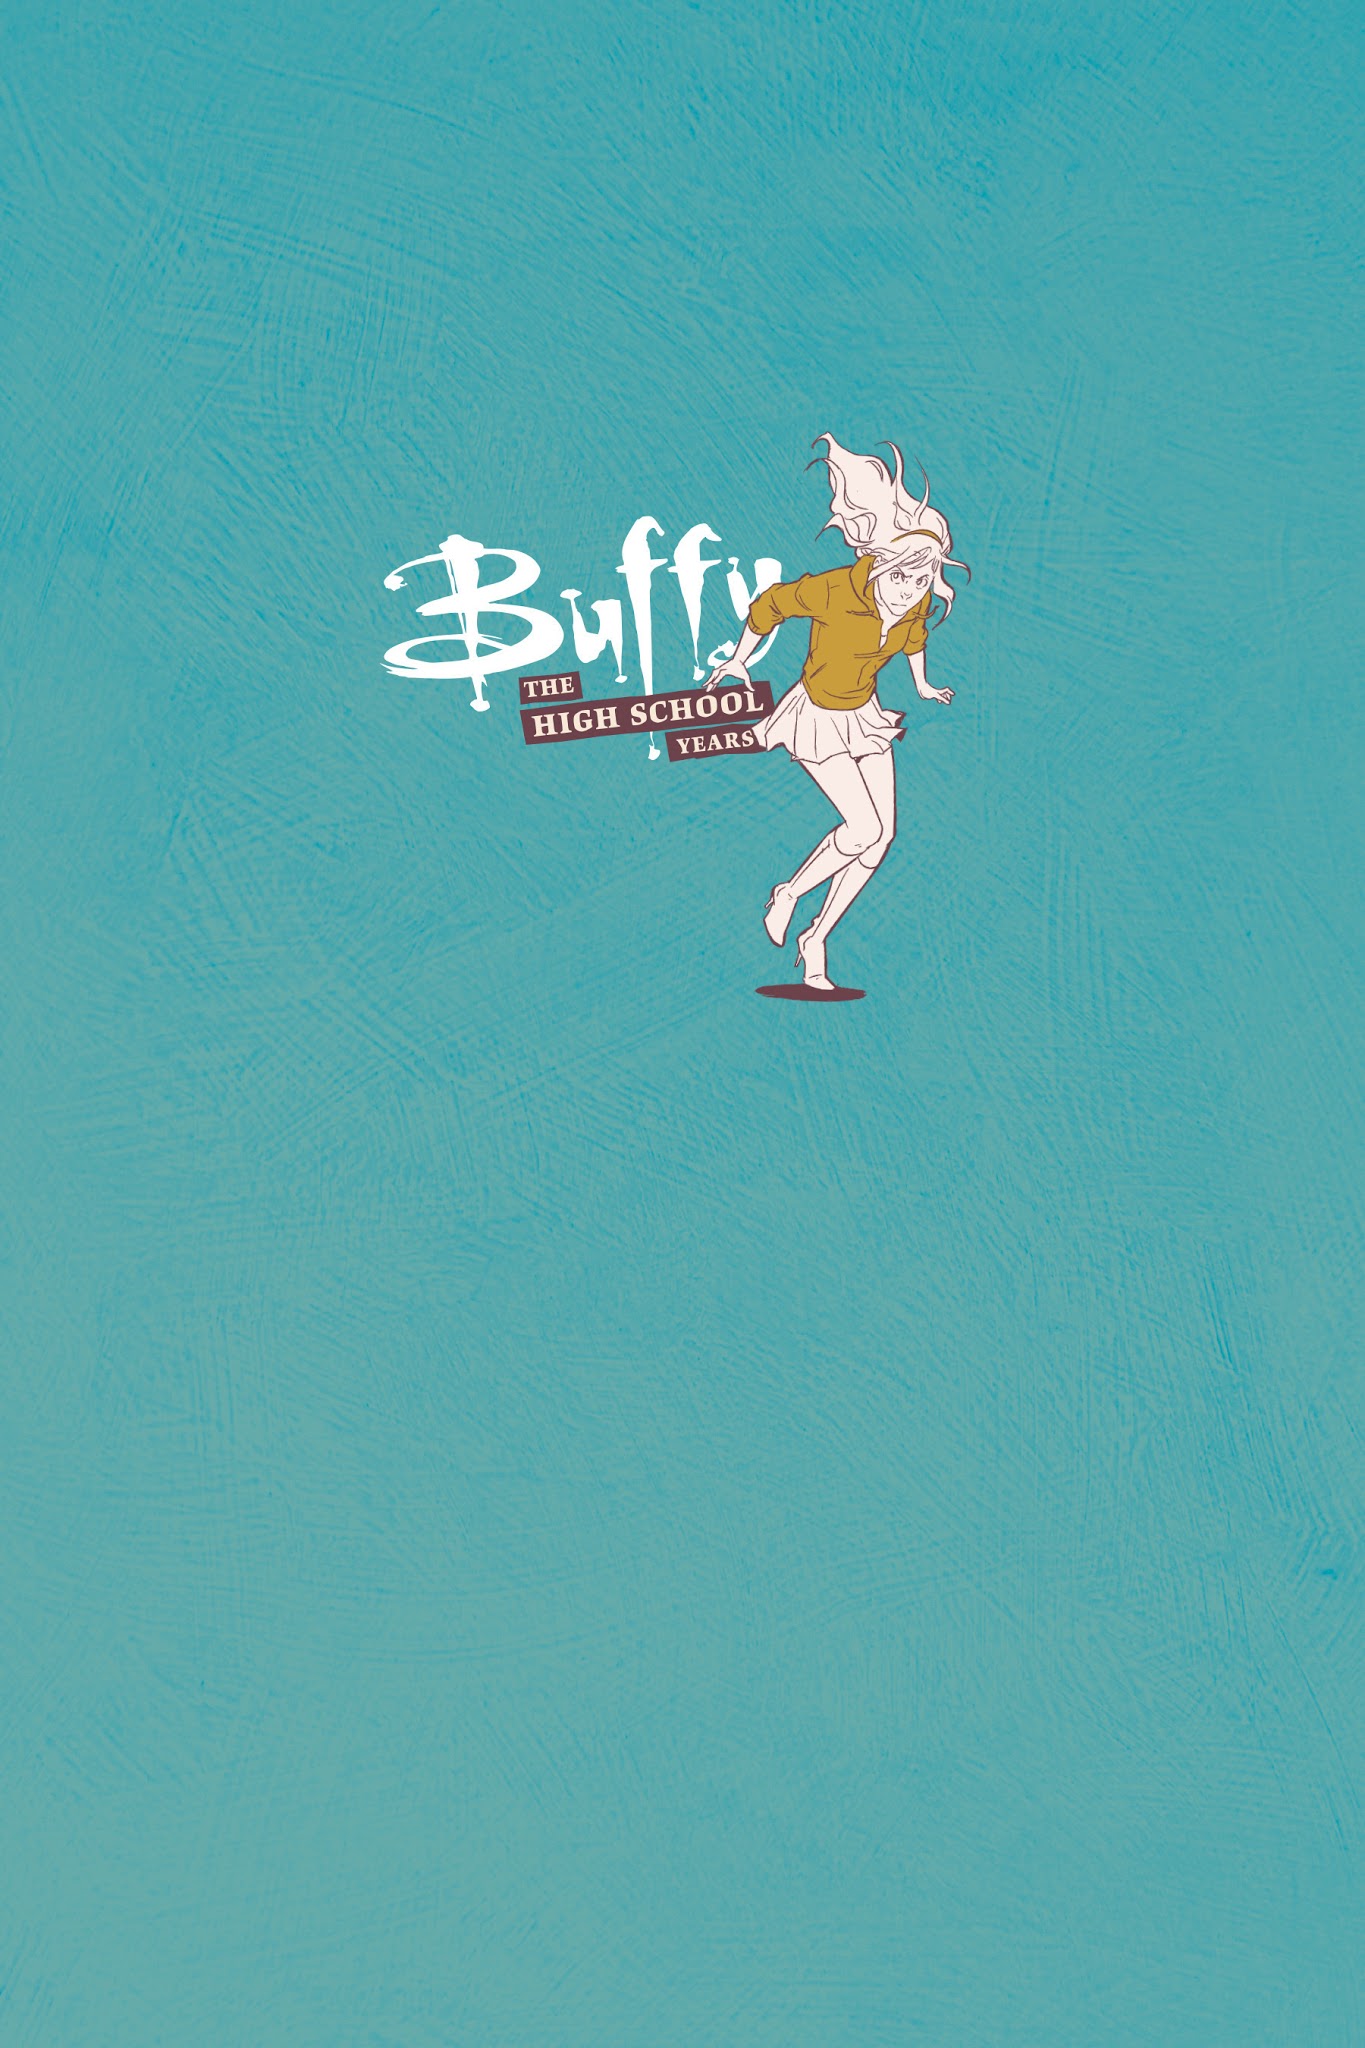 Read online Buffy: The High School Years comic -  Issue # TPB 2 - 7